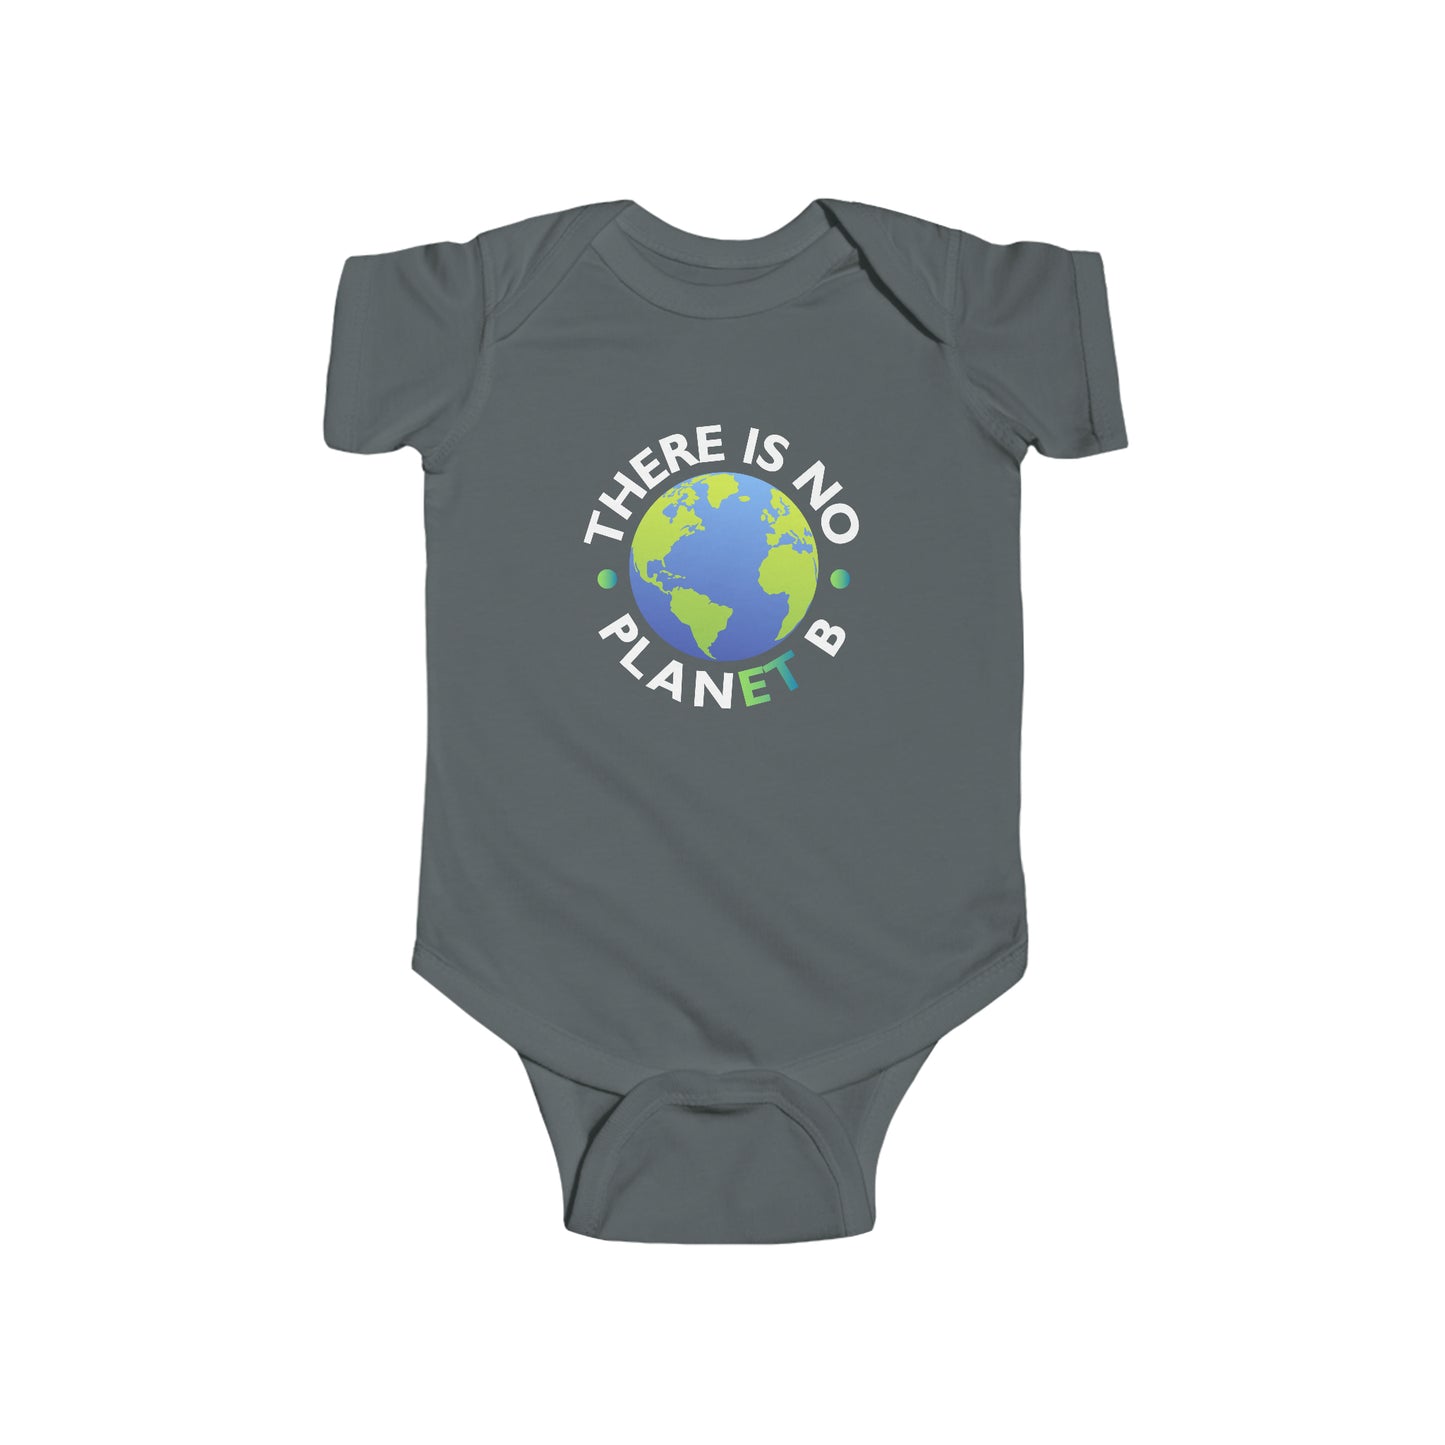 “There Is No Planet B” Infant Onesie